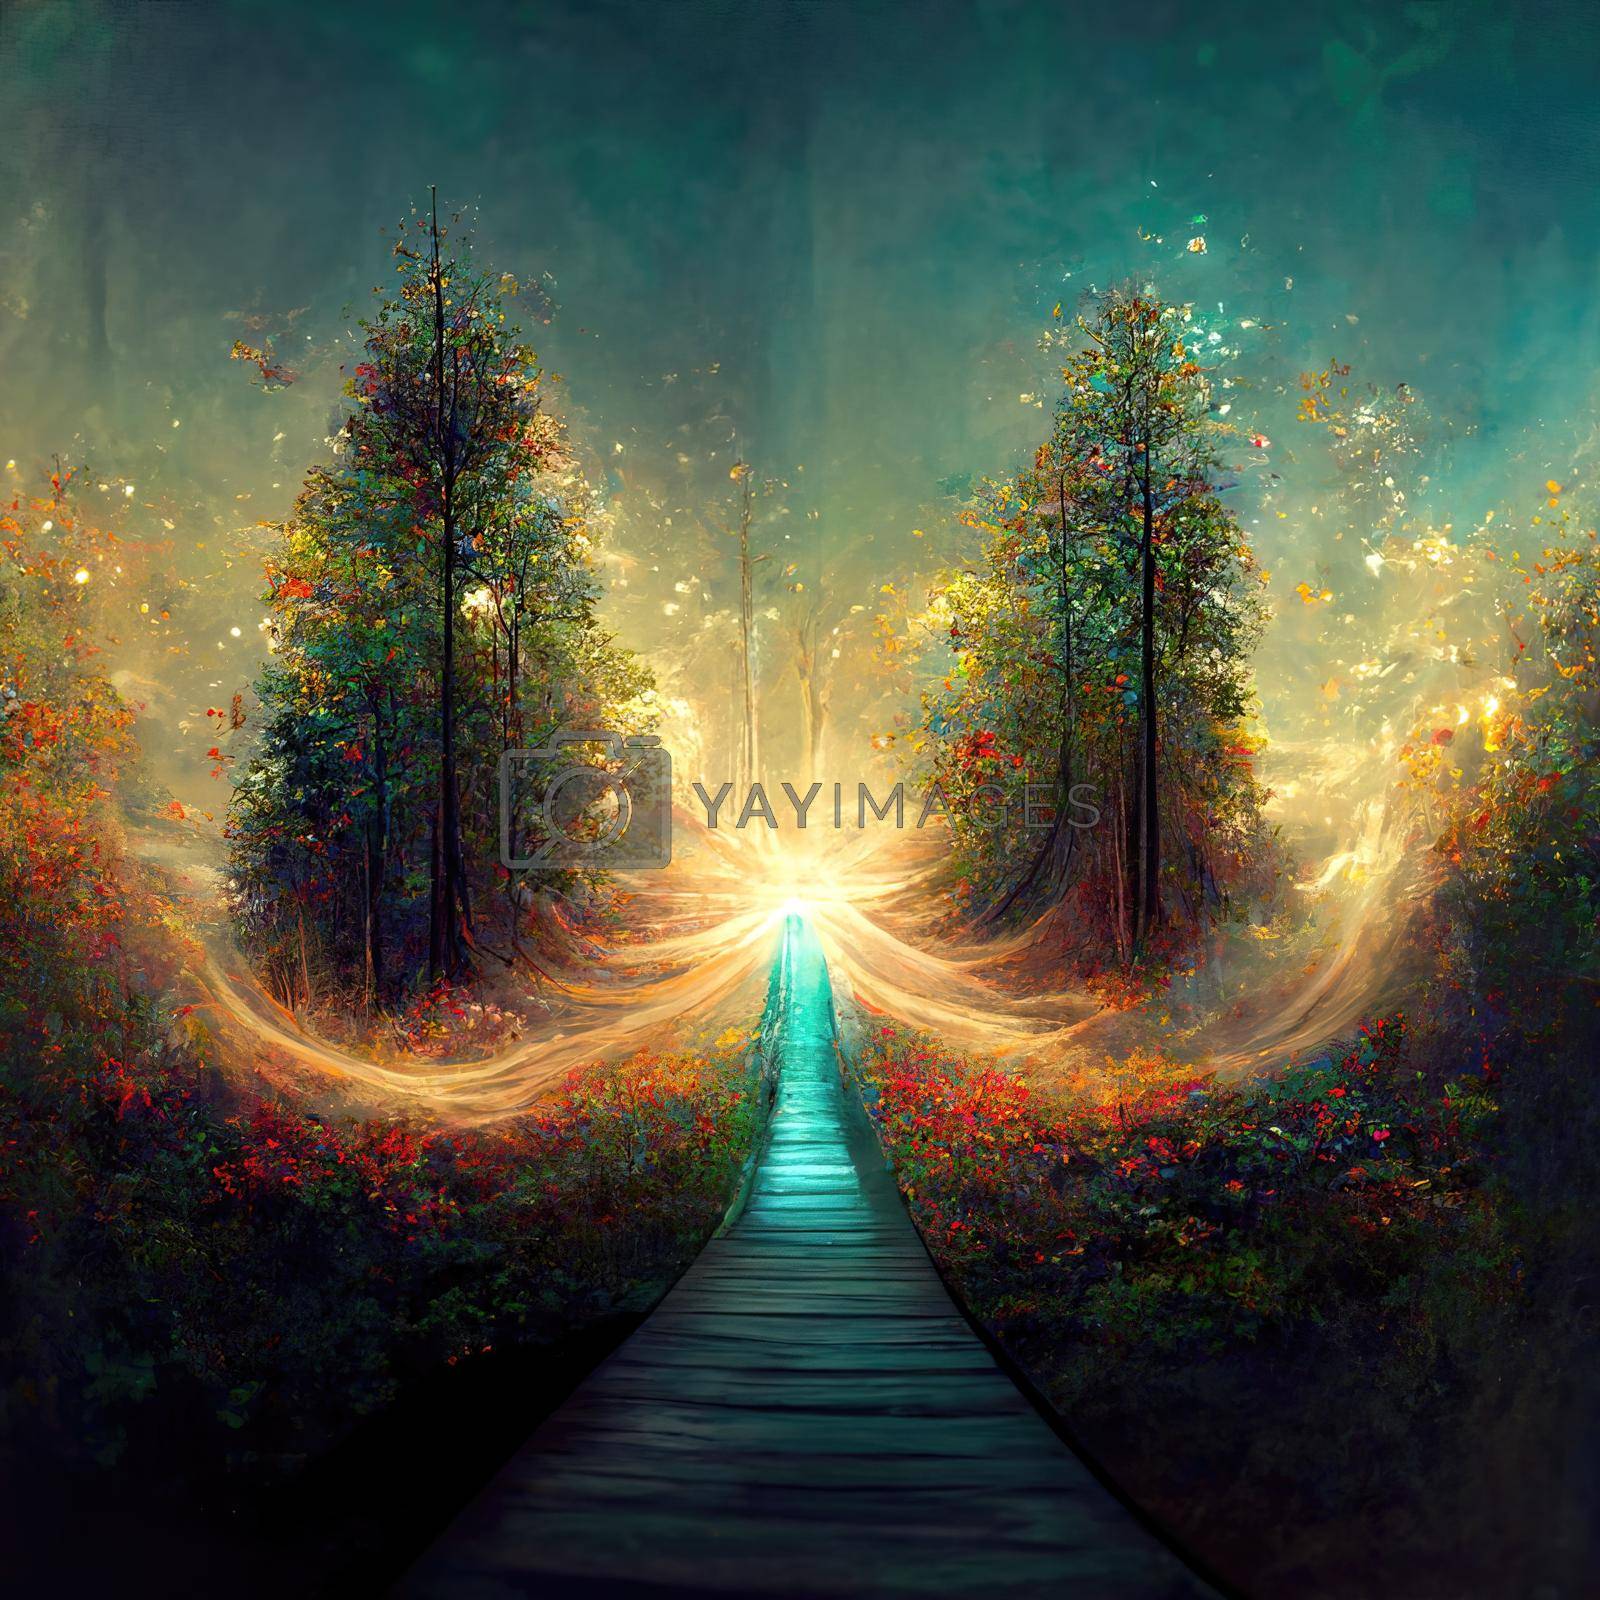 Royalty free image of Surreal path of gratitude in forest with amazing light, 3d illustration by Farcas